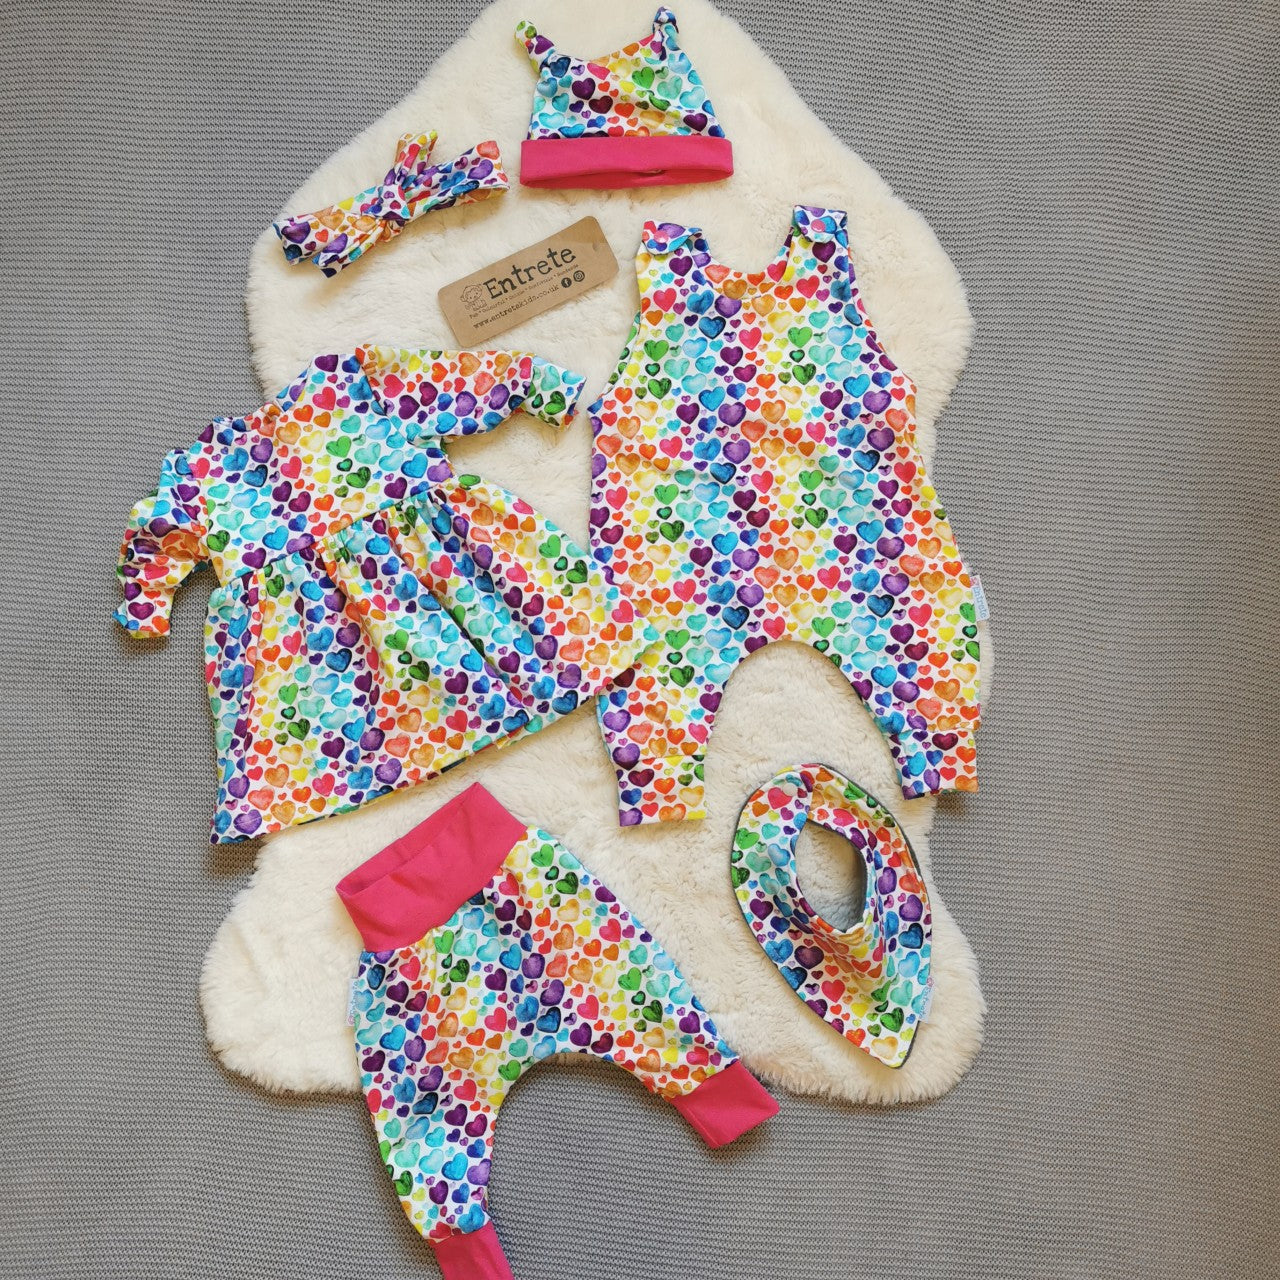 A full baby gift set shown in rainbow hearts for demonstration purposes, your gift set will be handmade using light blue kids animals cotton jersey.